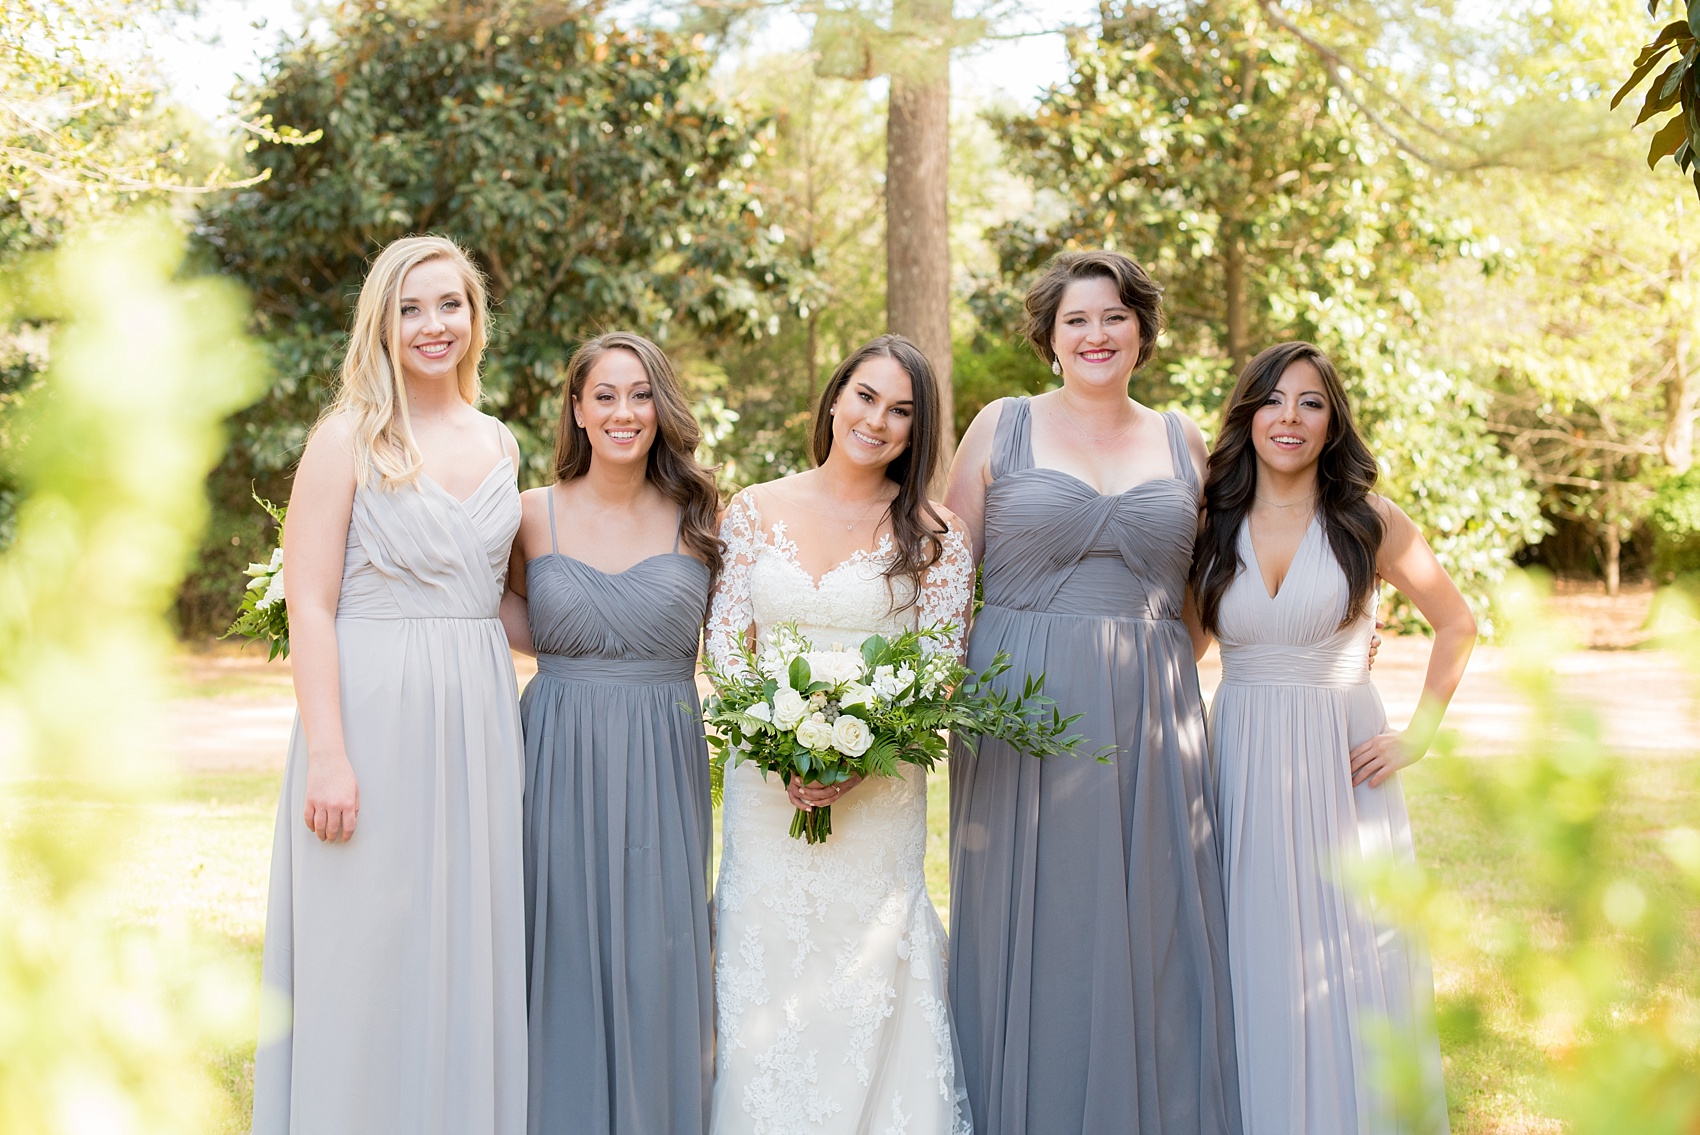 The Sutherland Wedding Photos by Mikkel Paige Photography. Bridal party picture with the bride in lace Pronovias and bridesmaids party in various shades of grey gowns. Planning by A Southern Soiree.